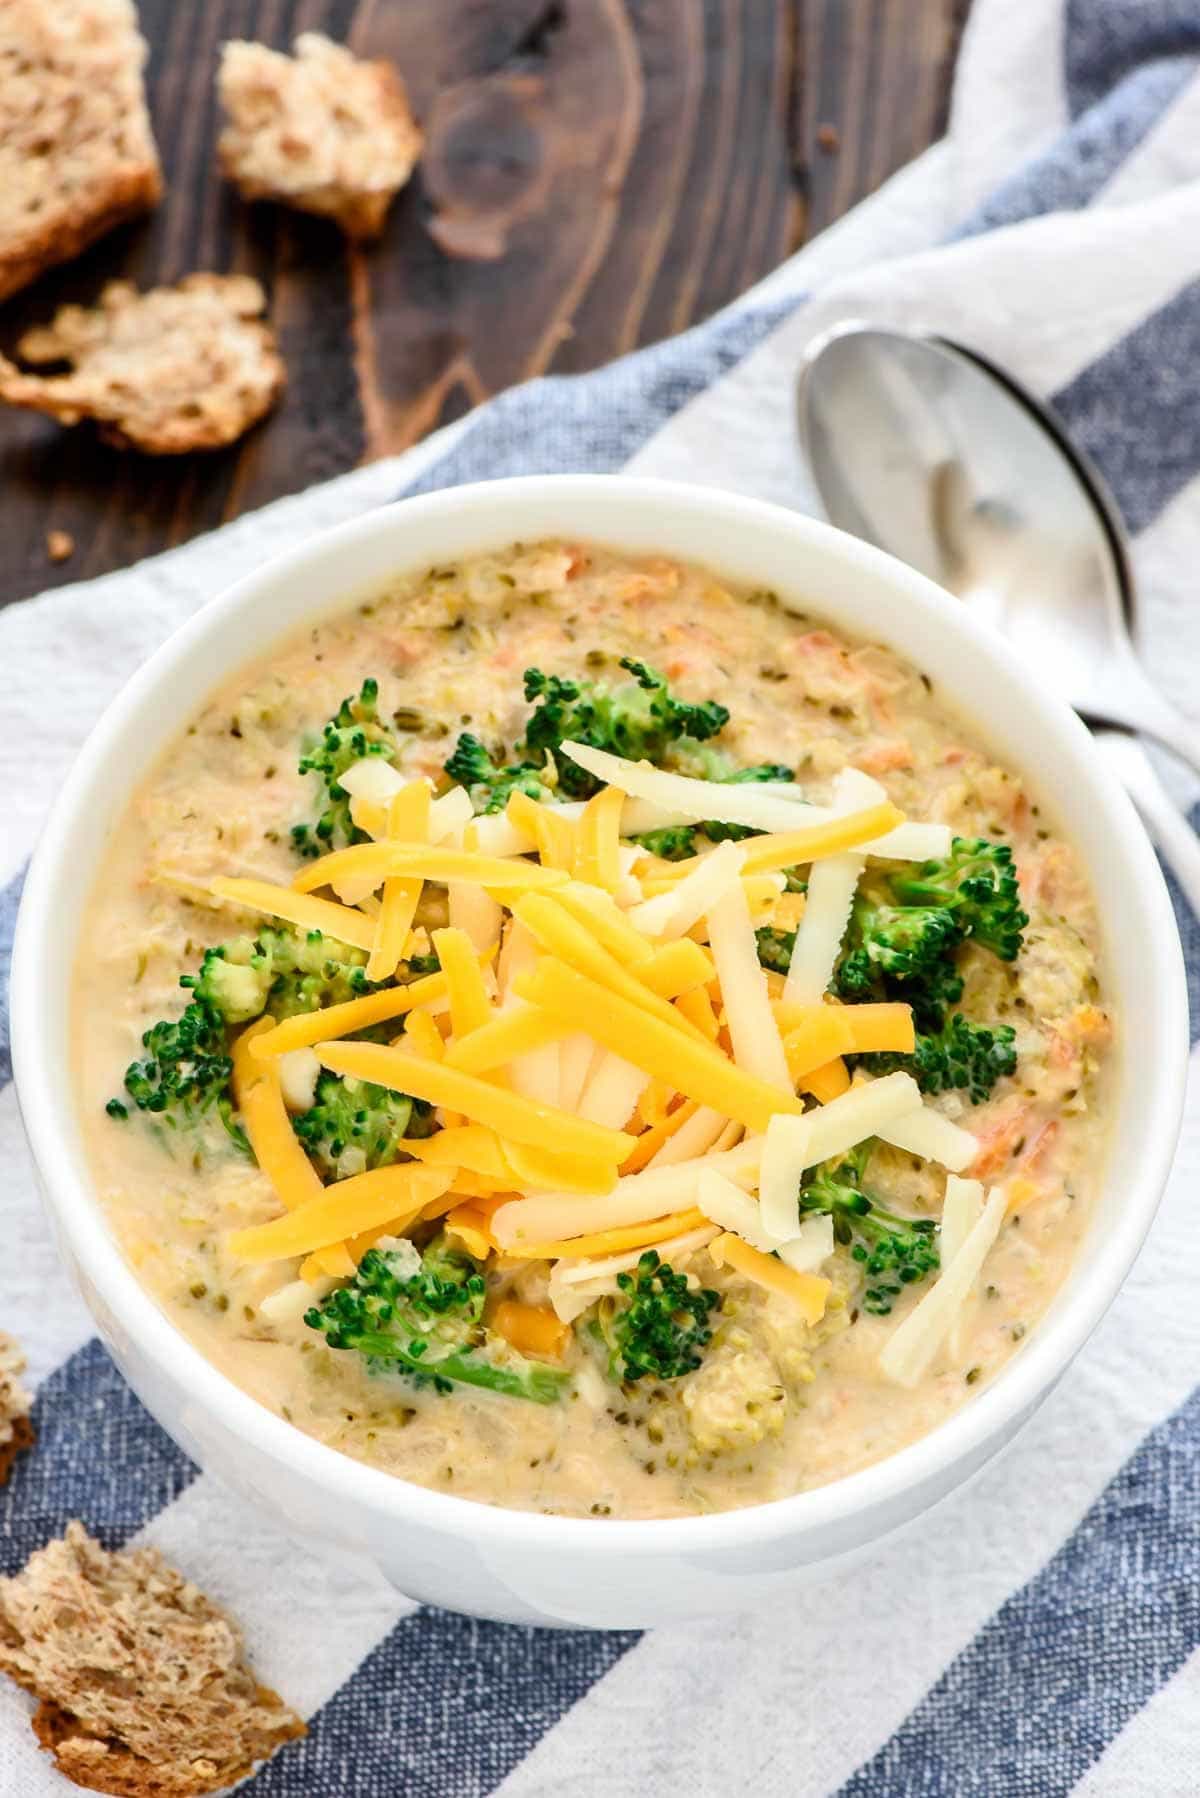 https://www.the36thavenue.com/wp-content/uploads/2016/11/Easy-Broccoli-and-Cheese-Soup-Slow-Cooker.jpeg